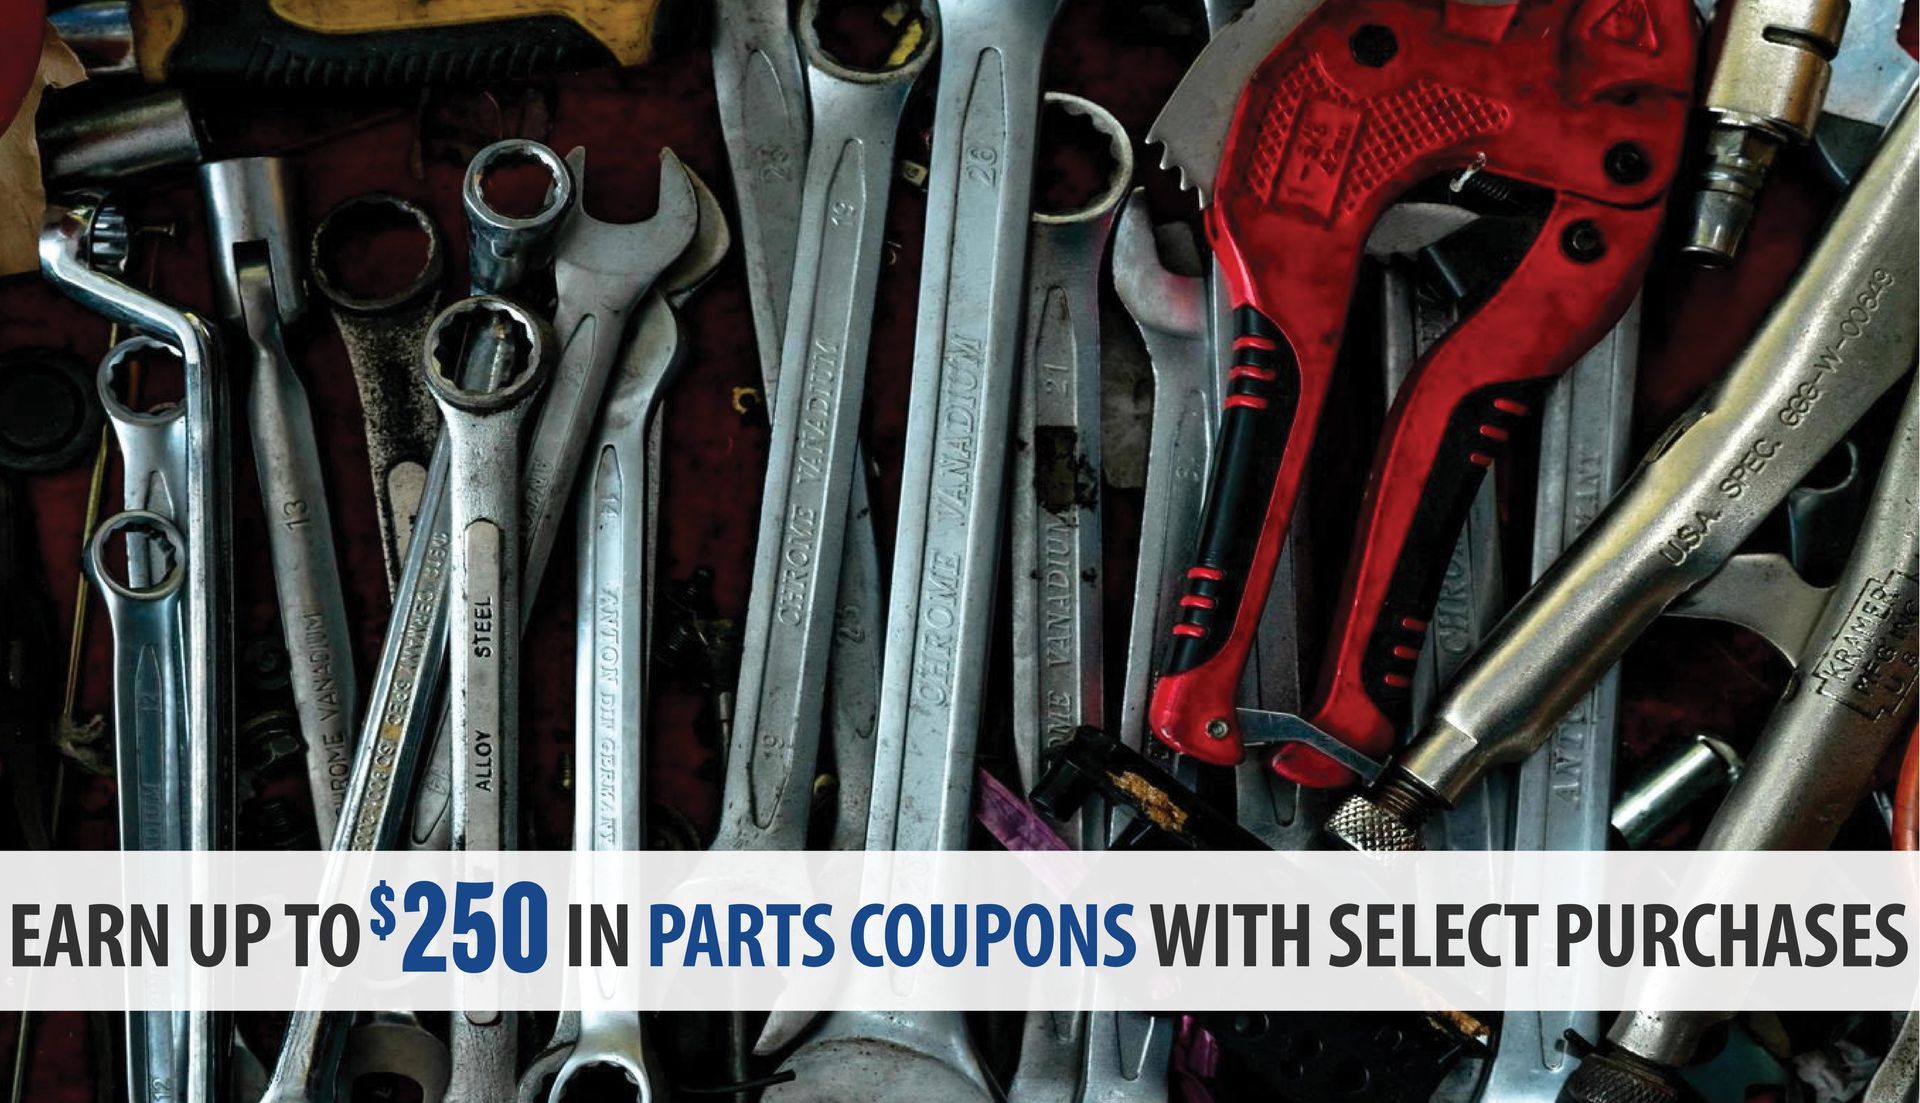 Up to $250 in Parts Coupons with Purchase